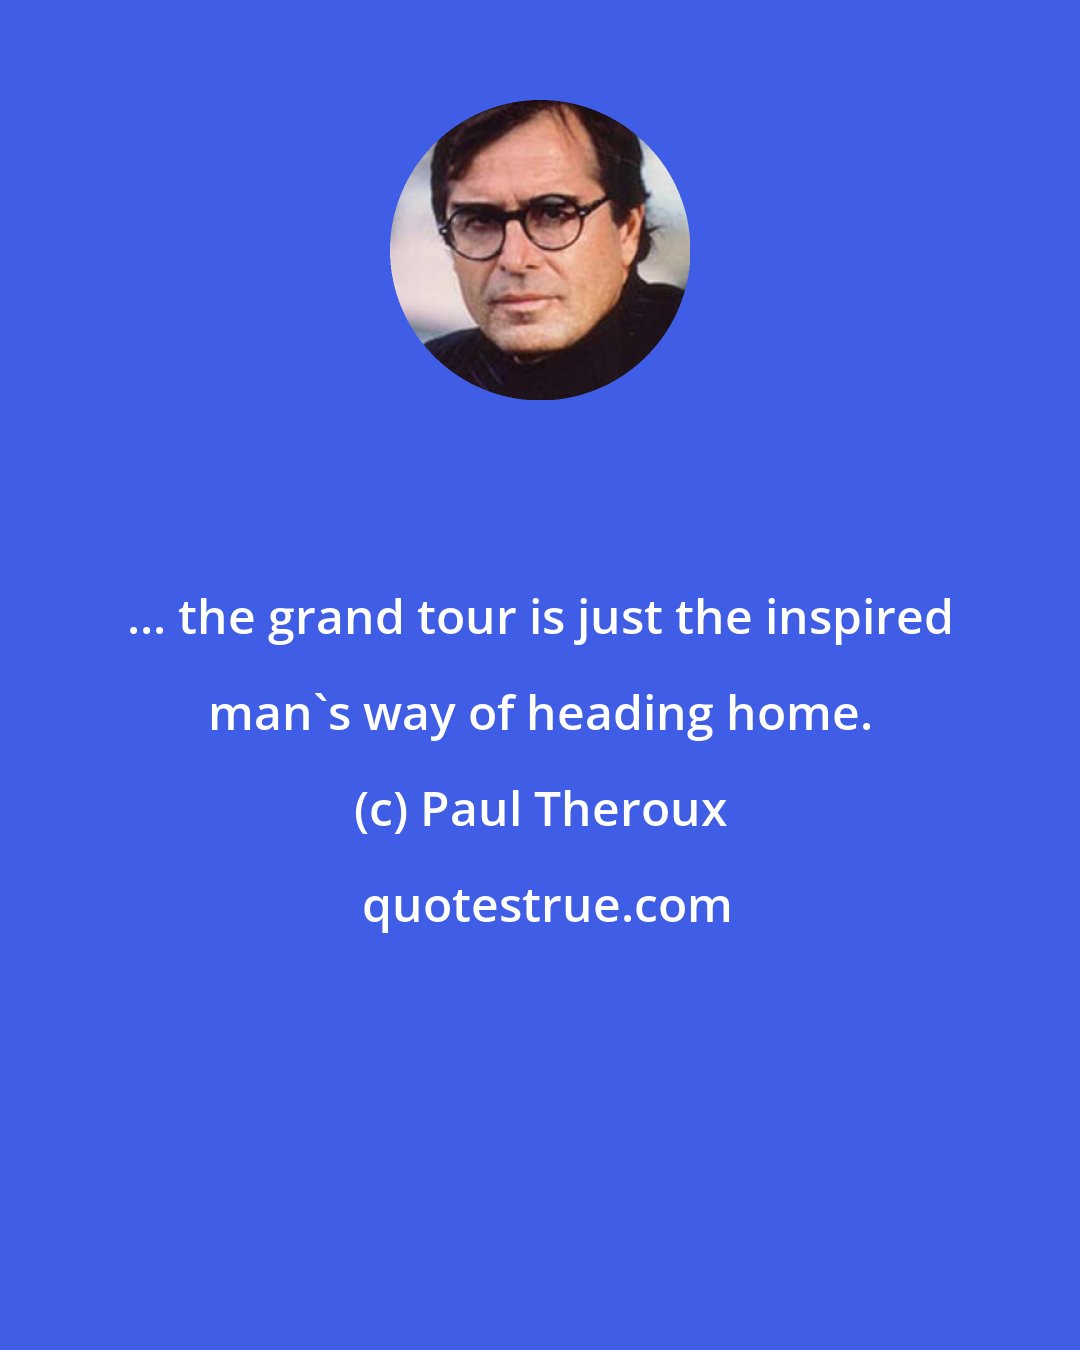 Paul Theroux: ... the grand tour is just the inspired man's way of heading home.